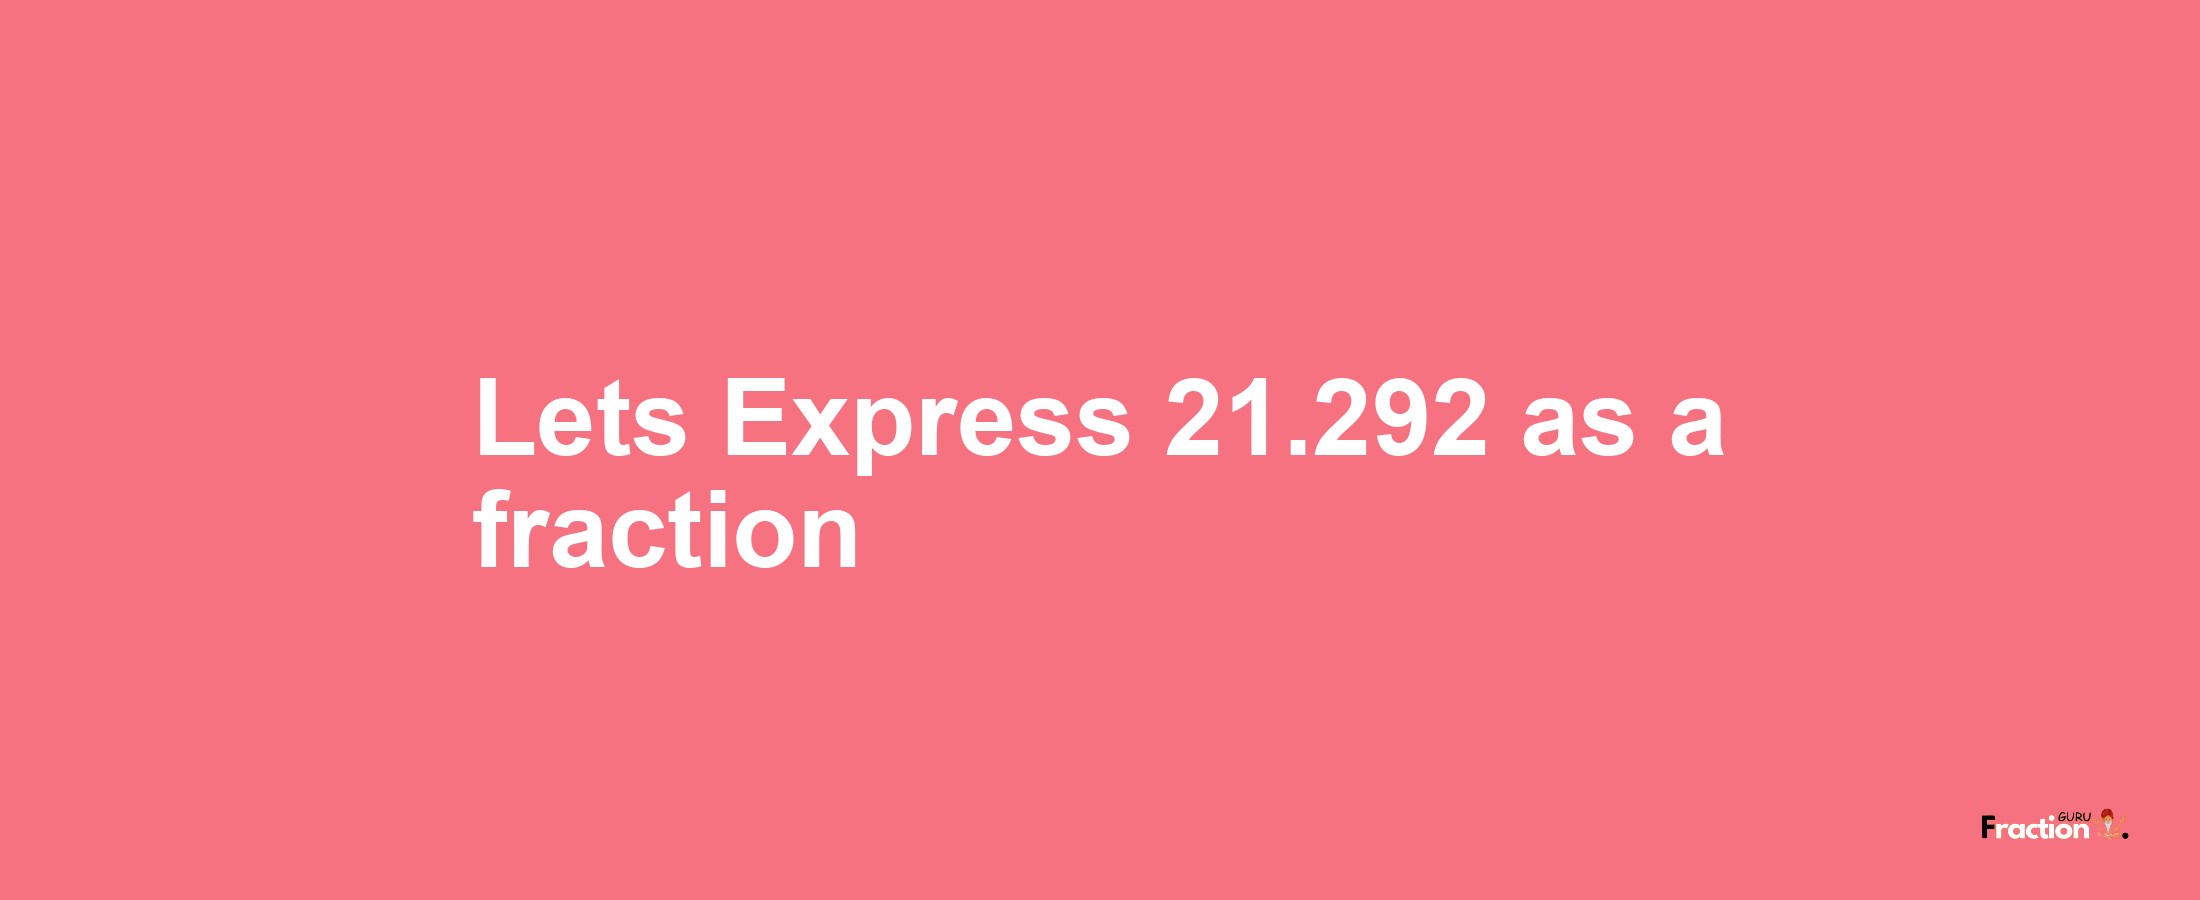 Lets Express 21.292 as afraction